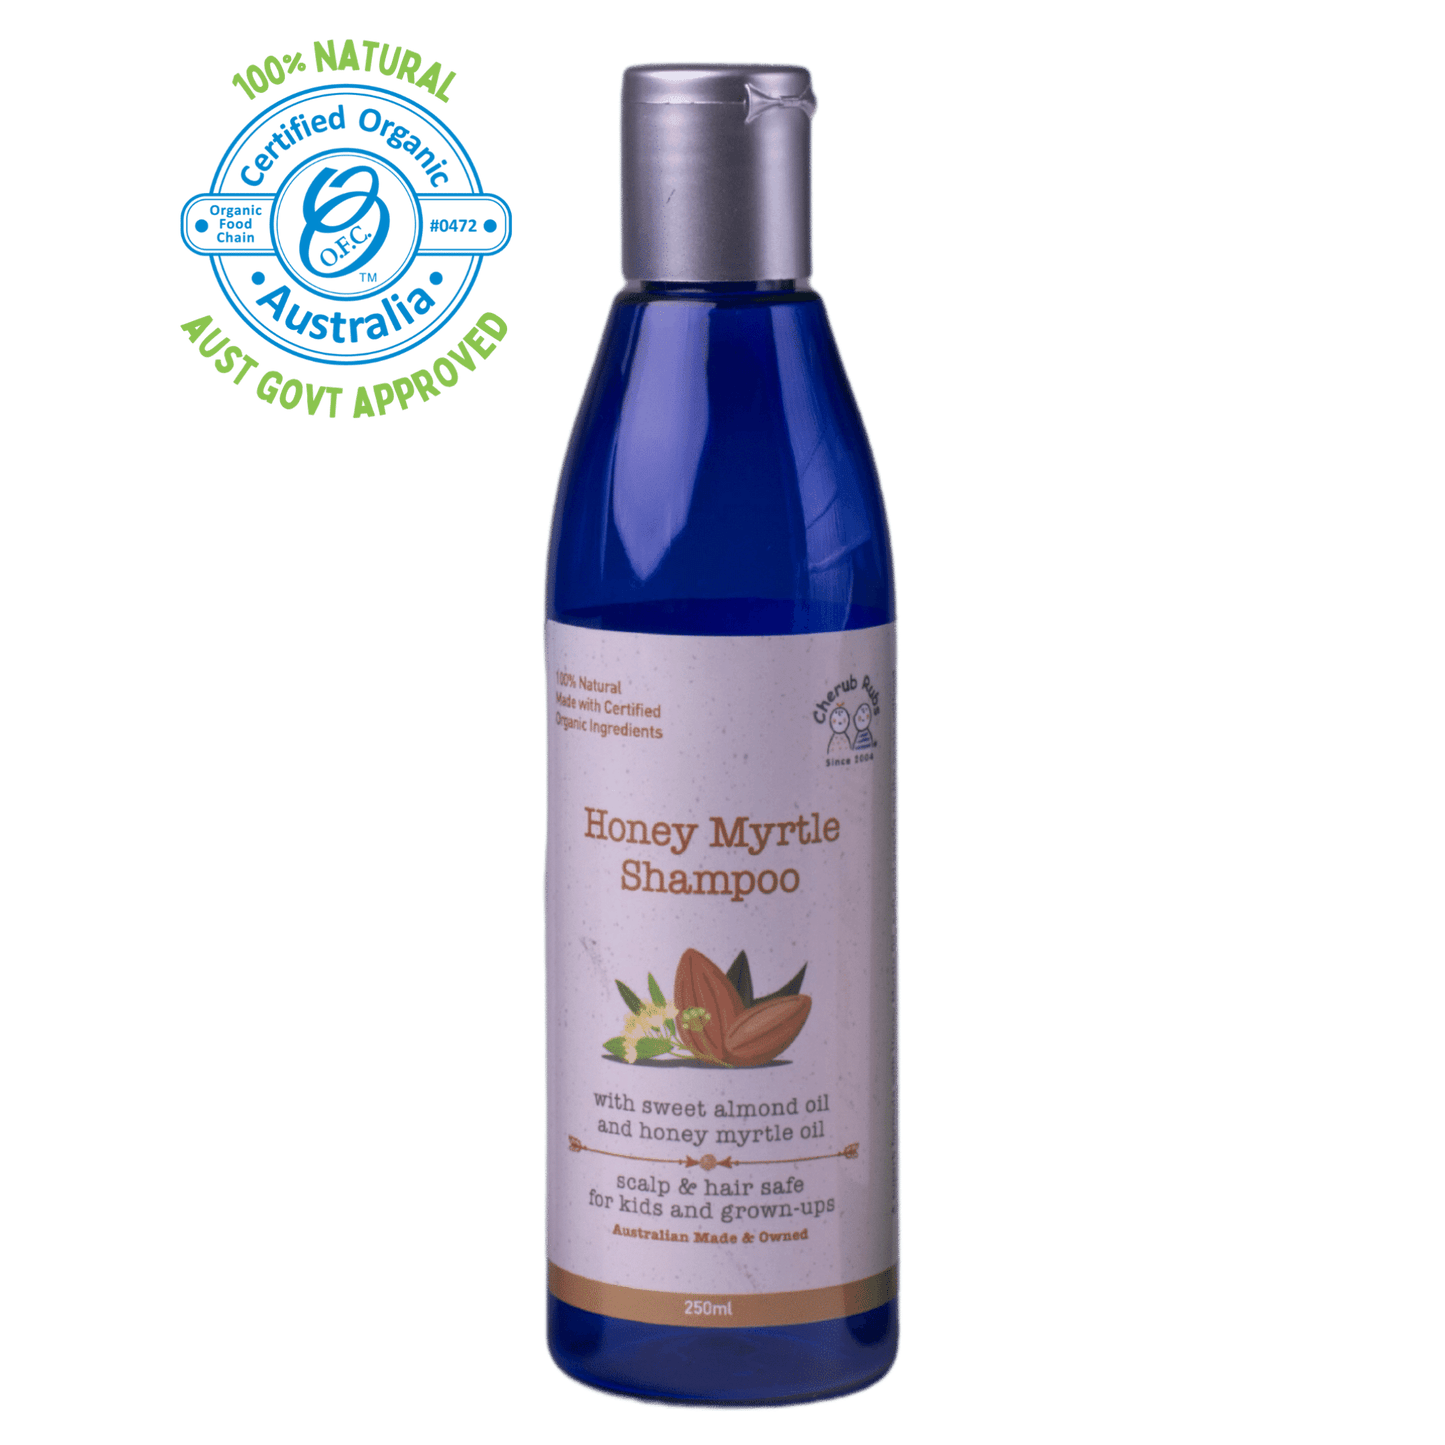 Honey Myrtle Shampoo, an organic skincare product suitable for adults and babies. Available in 250ml bottle.